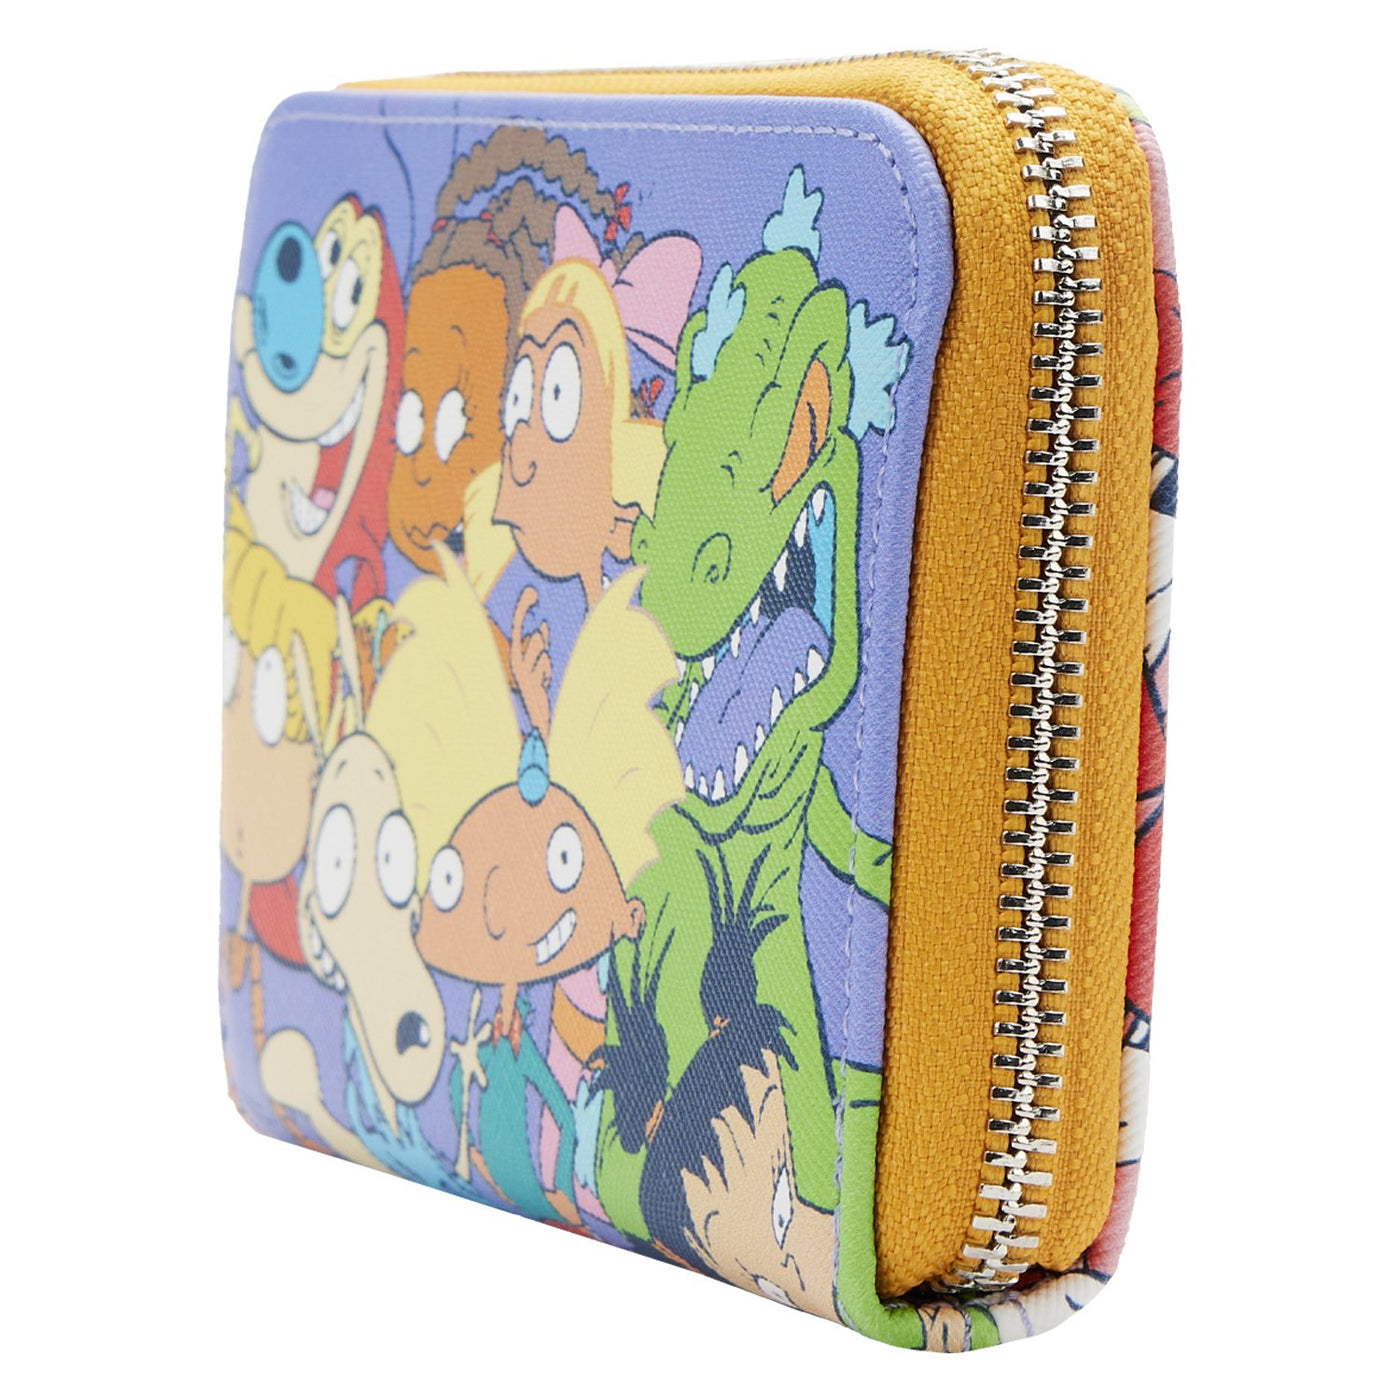 Loungefly Nickelodeon Nick 90s Allover Print Zip-Around Wallet - Side View